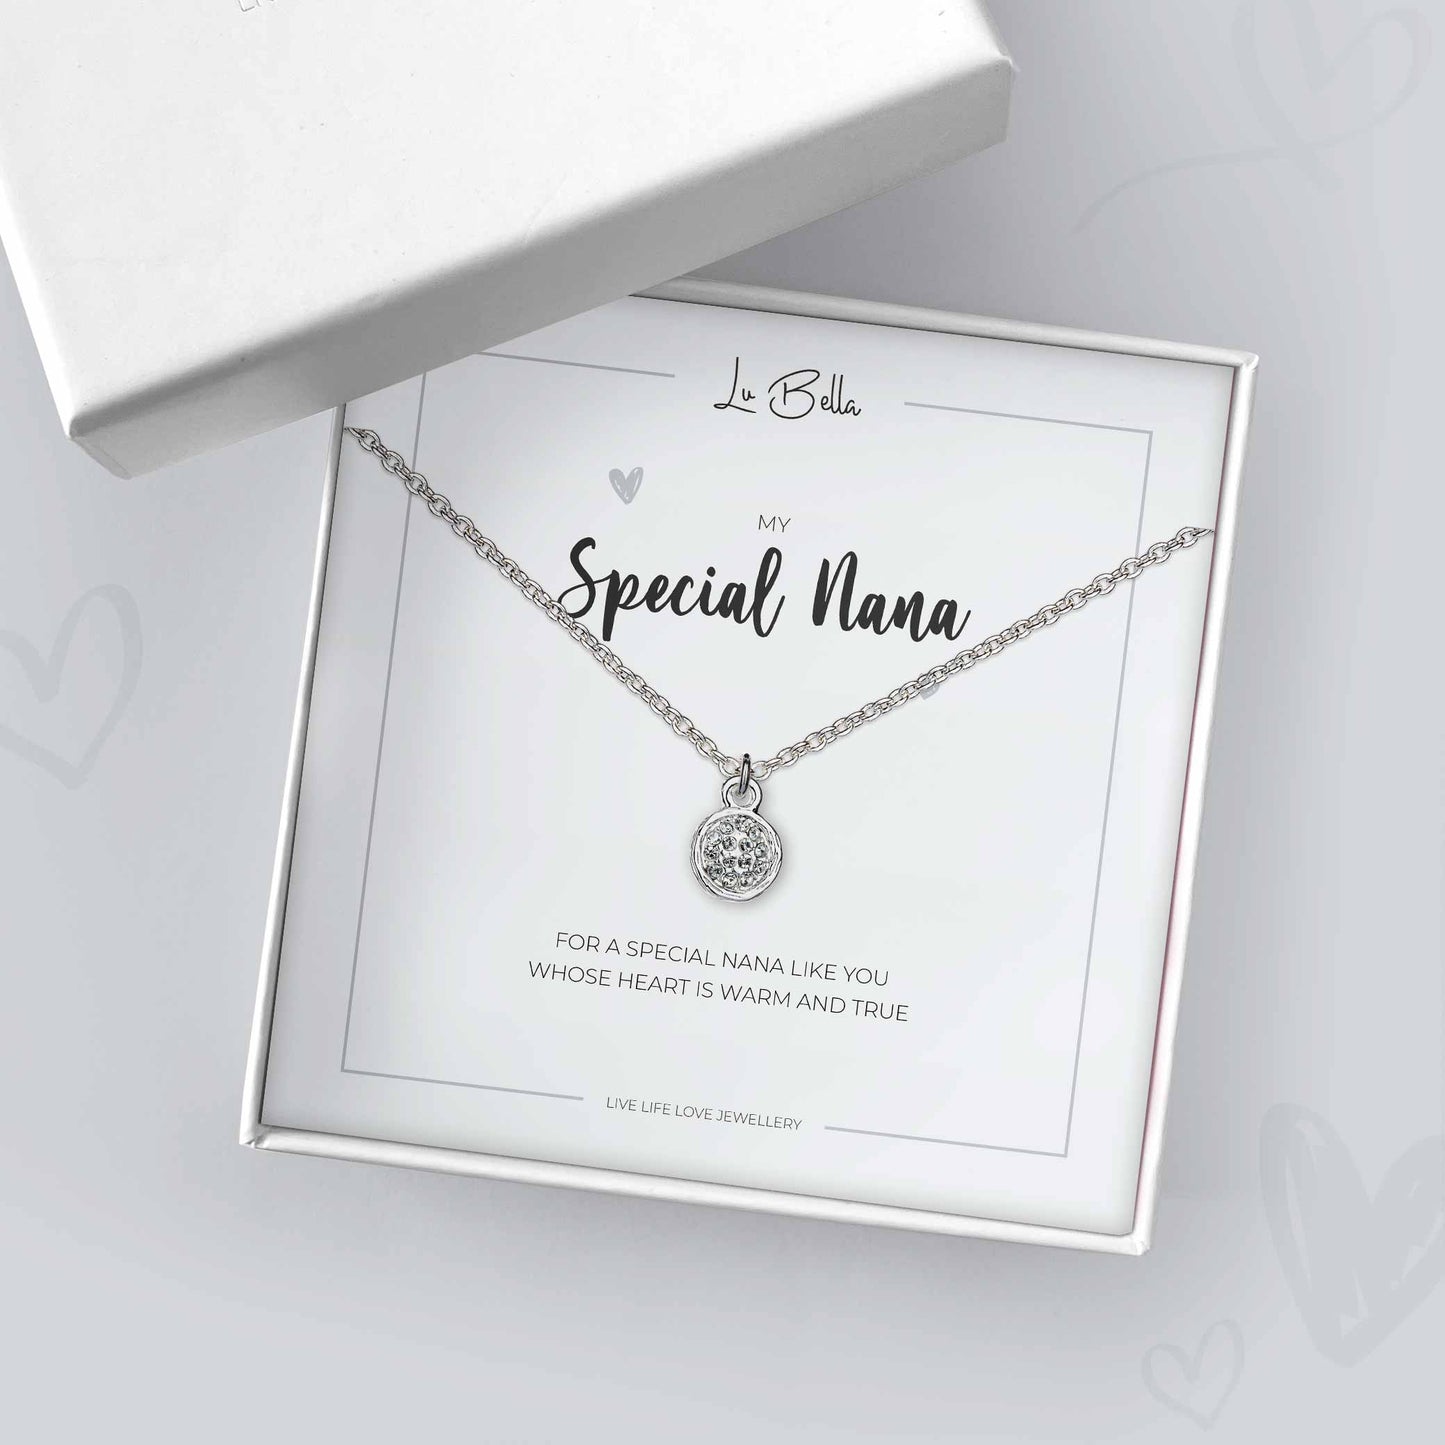 My Special Nana Sentiments Necklace